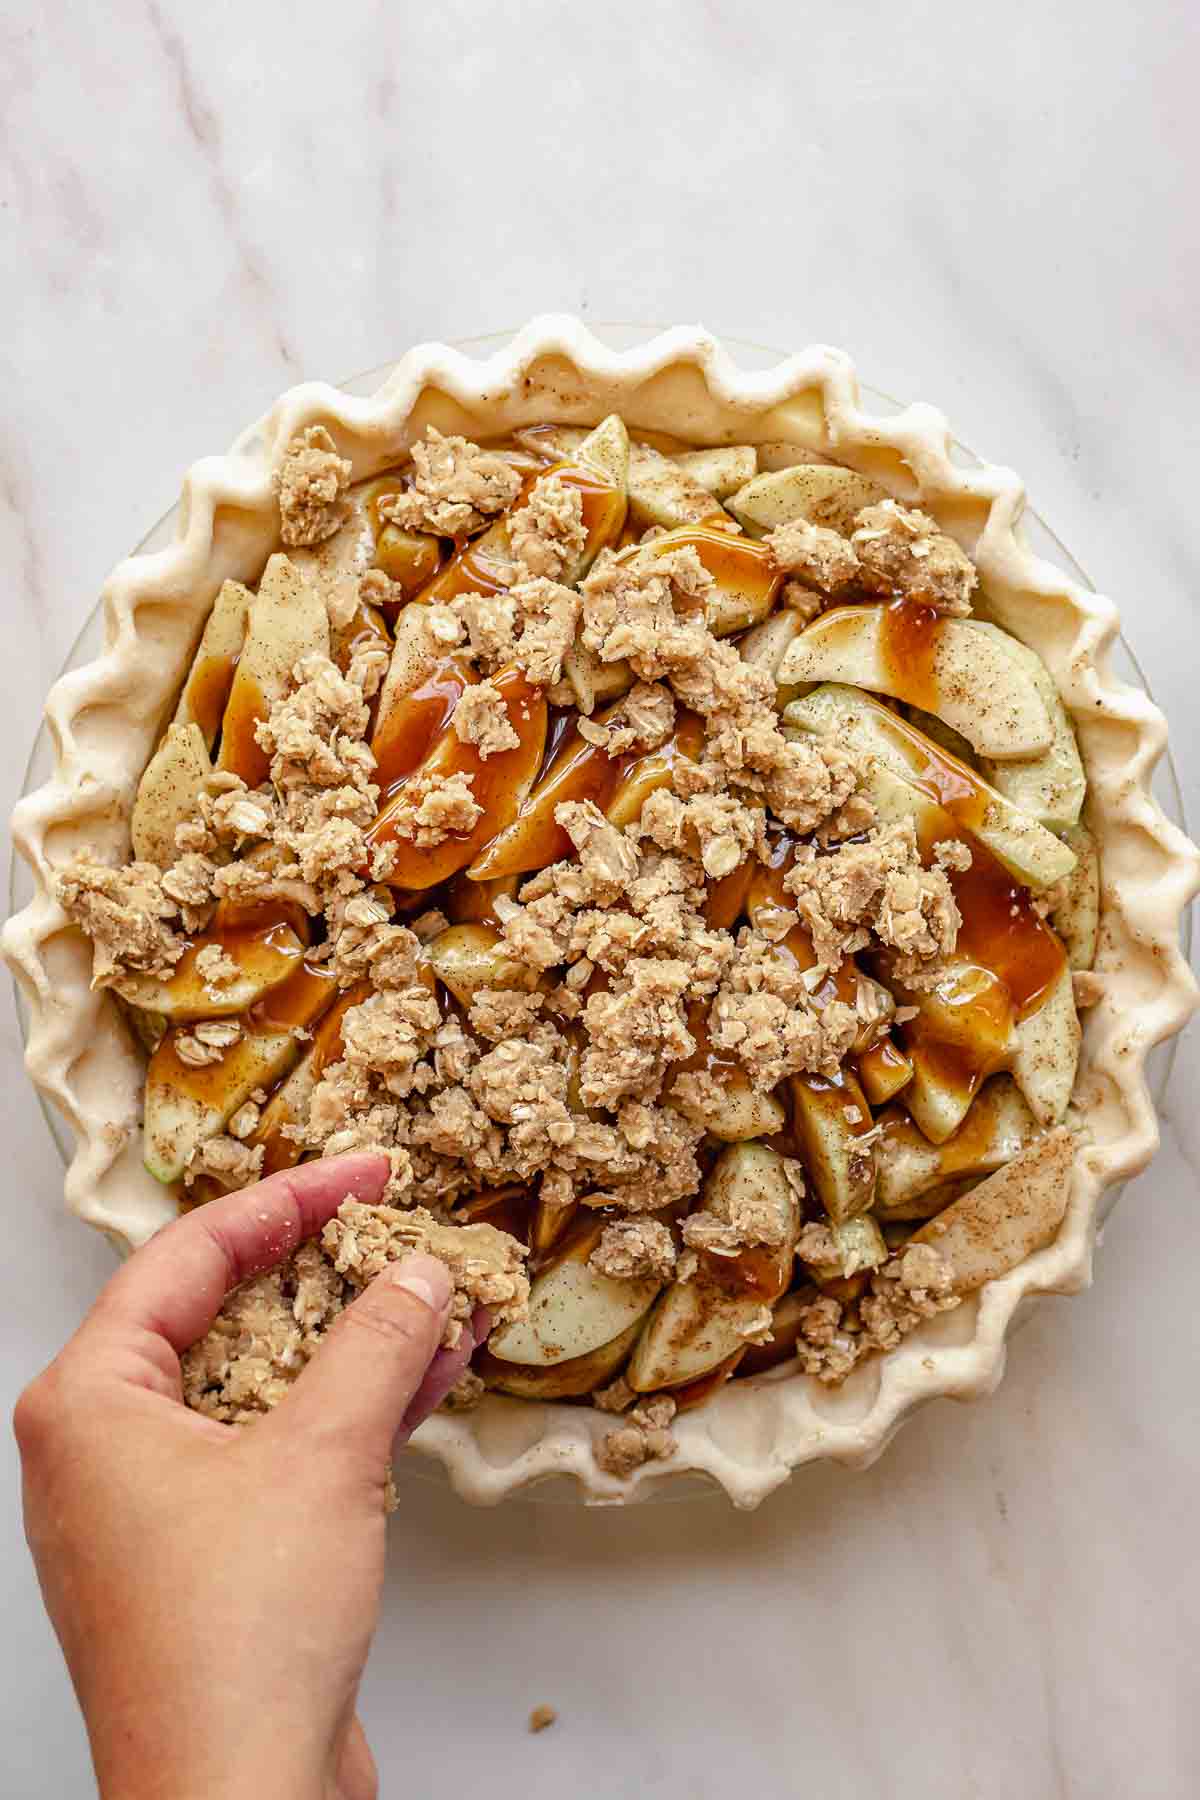 A hand adds crumb topping to the apples.